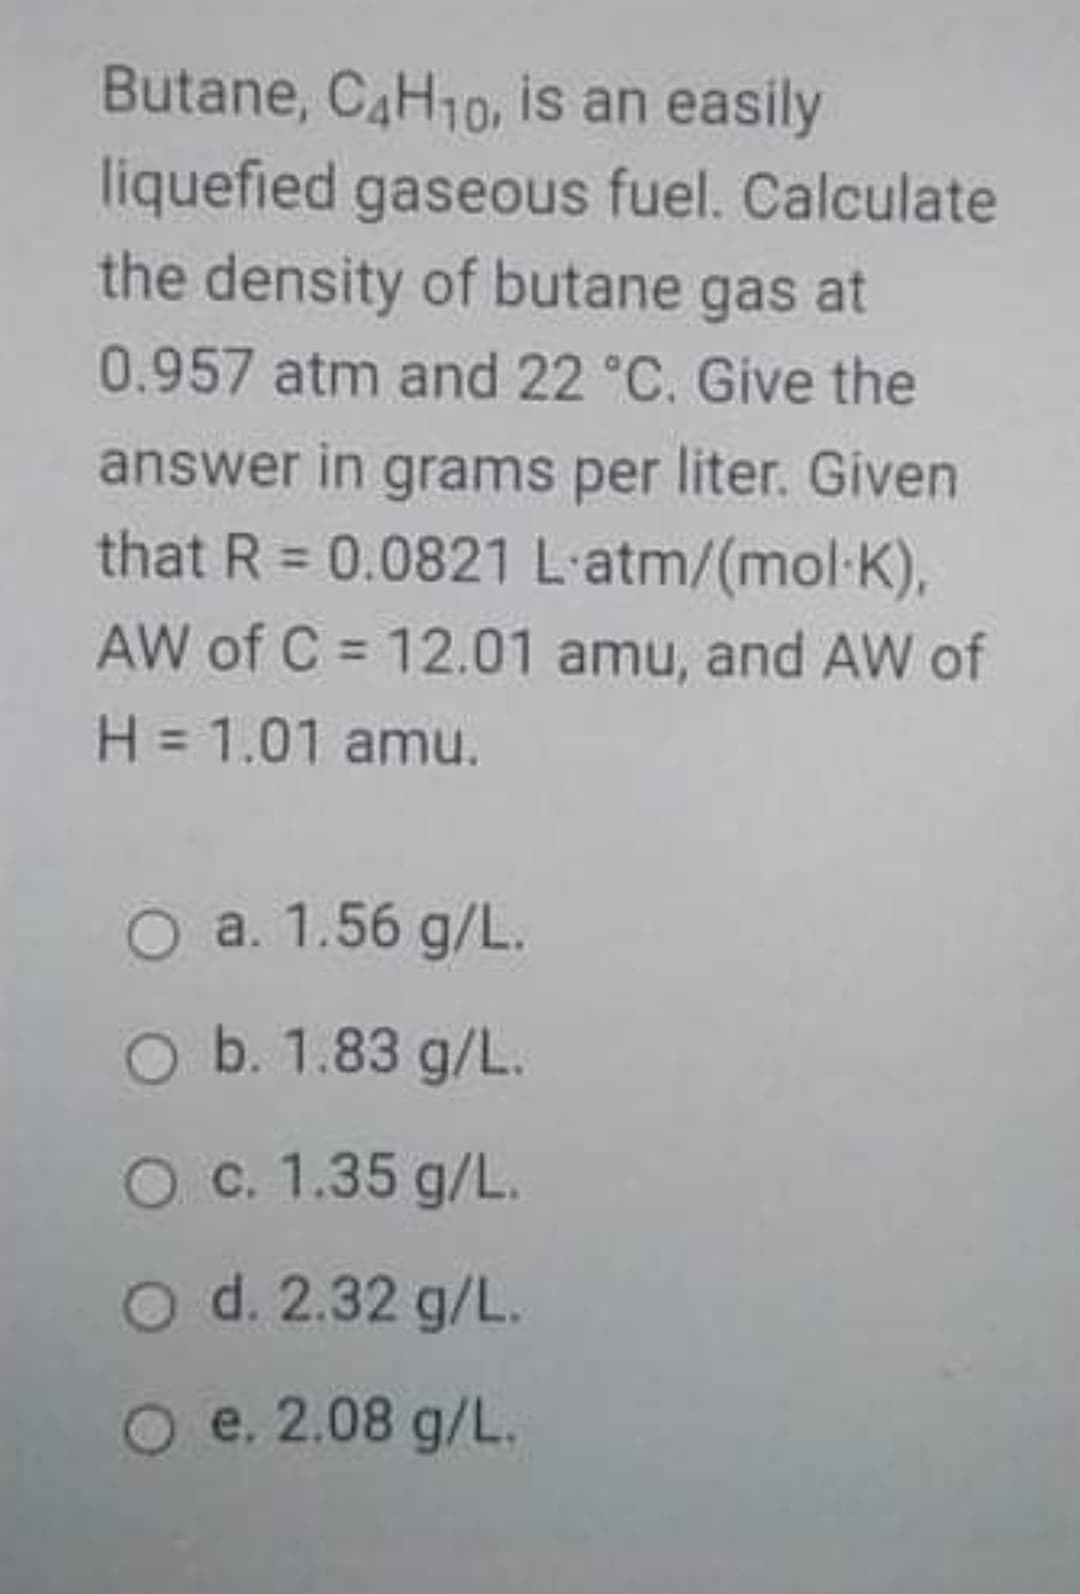 Butane, CAH10, is an easily
liquefied gaseous fuel. Calculate
the density of butane gas at
0.957 atm and 22 °C. Give the
answer in grams per liter. Given
that R = 0.0821 L-atm/(mol-K),
%3D
AW of C = 12.01 amu, and AW of
%3D
H = 1.01 amu.
O a. 1.56 g/L.
O b. 1.83 g/L.
O c. 1.35 g/L.
O d. 2.32 g/L.
O e. 2.08 g/L.
